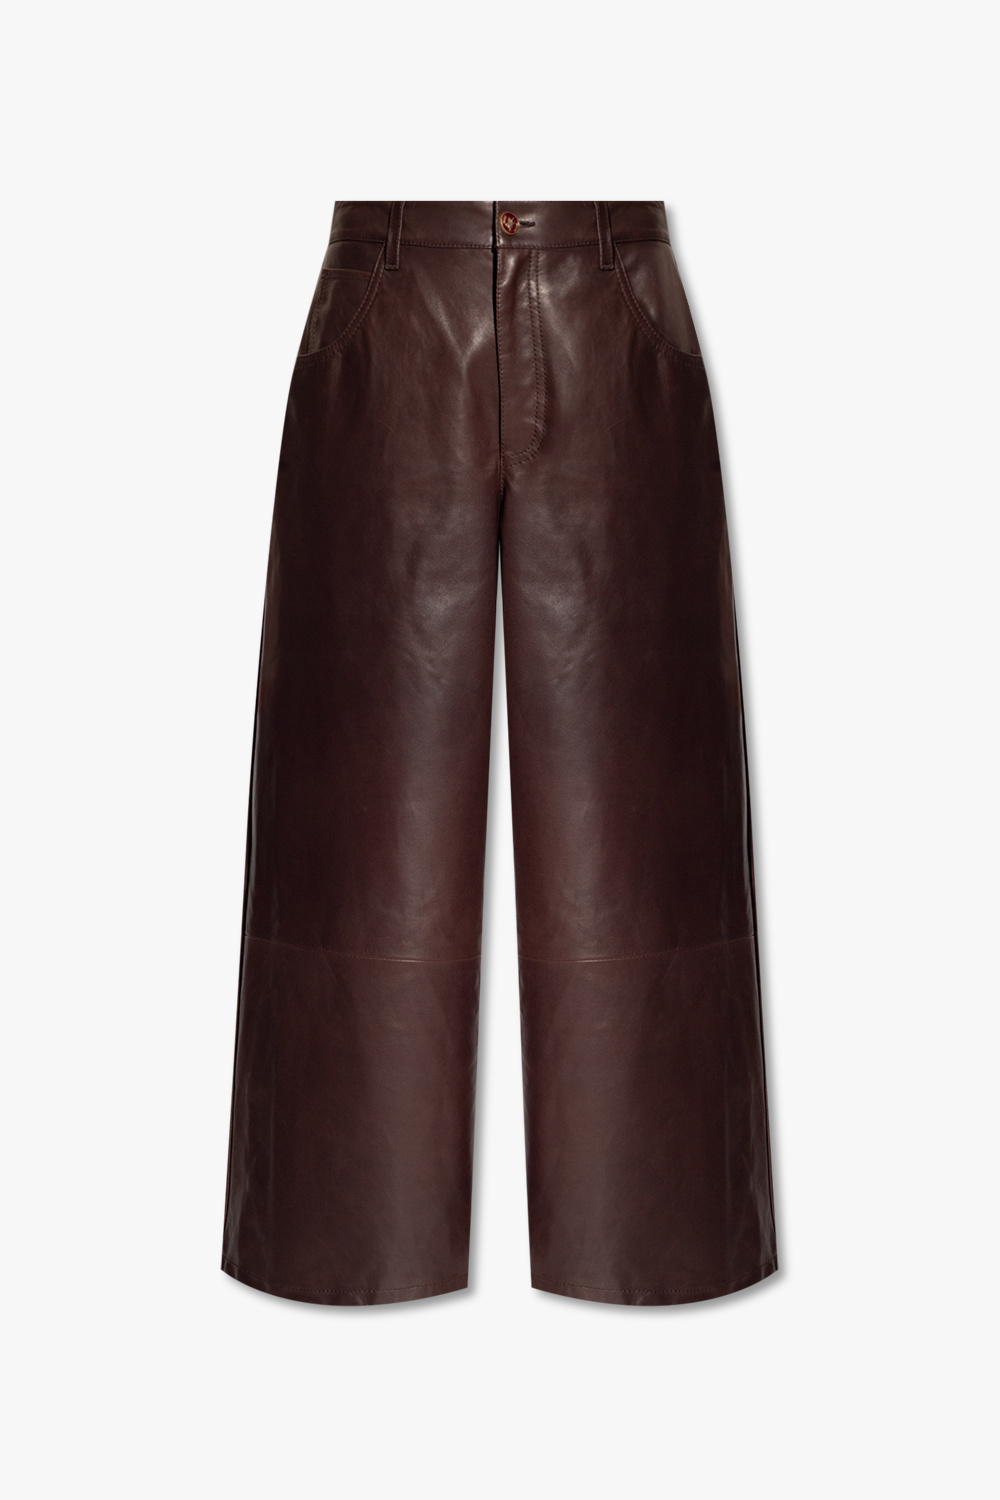 Etro Leather trousers